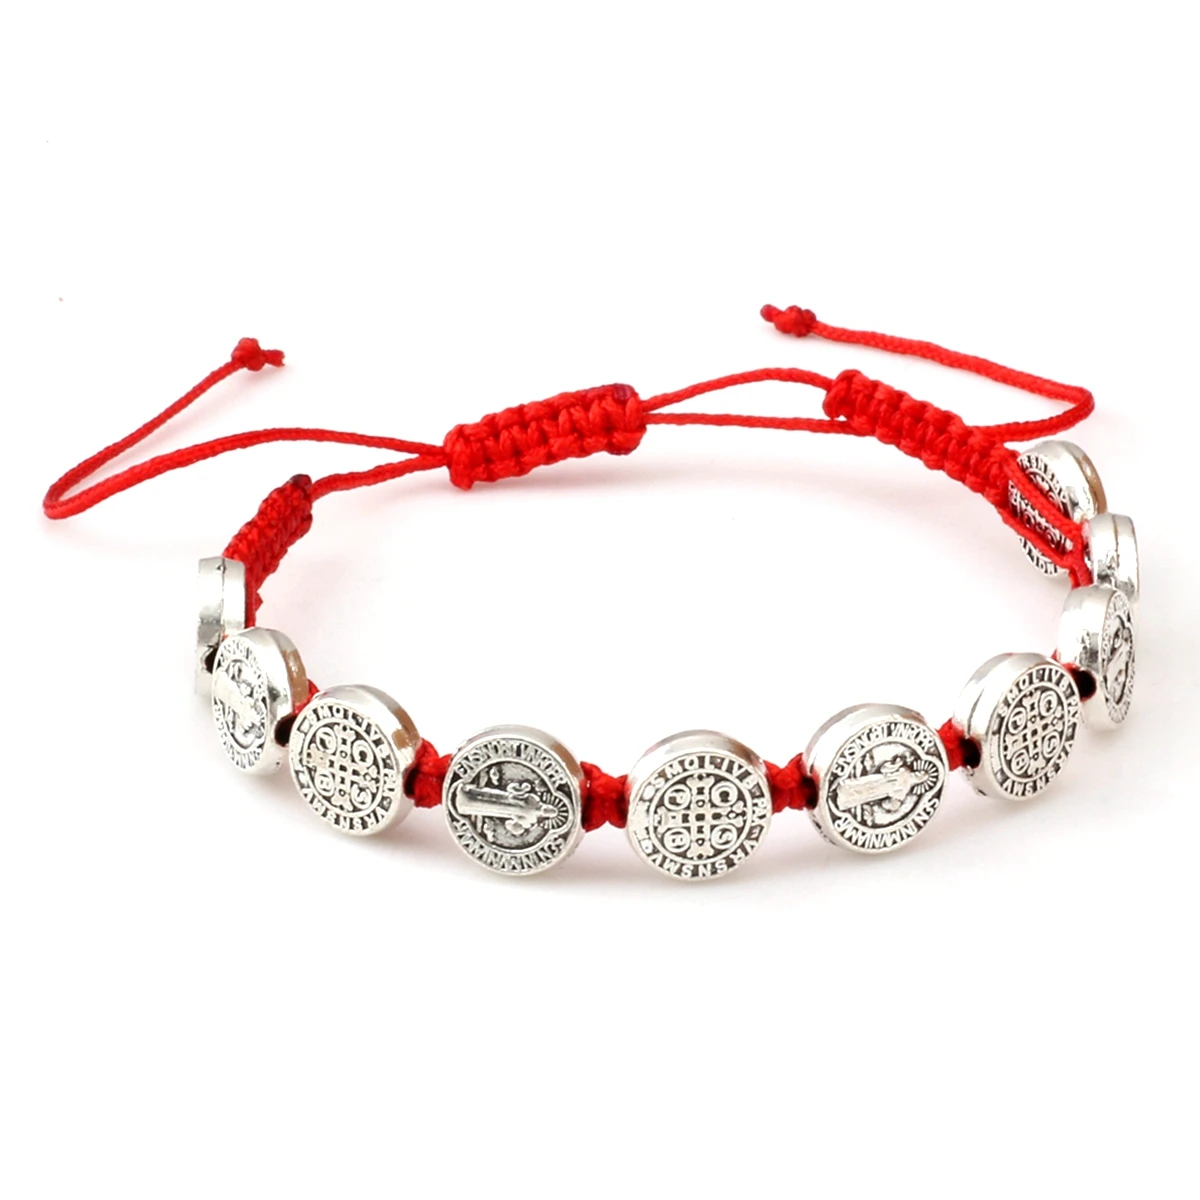 

2Pcs Alloy Saint Benedict Medal On Adjustable Red Cord Hand-Woven Wrist Bracelet For Men & Ms. Jewelry Gift B-37